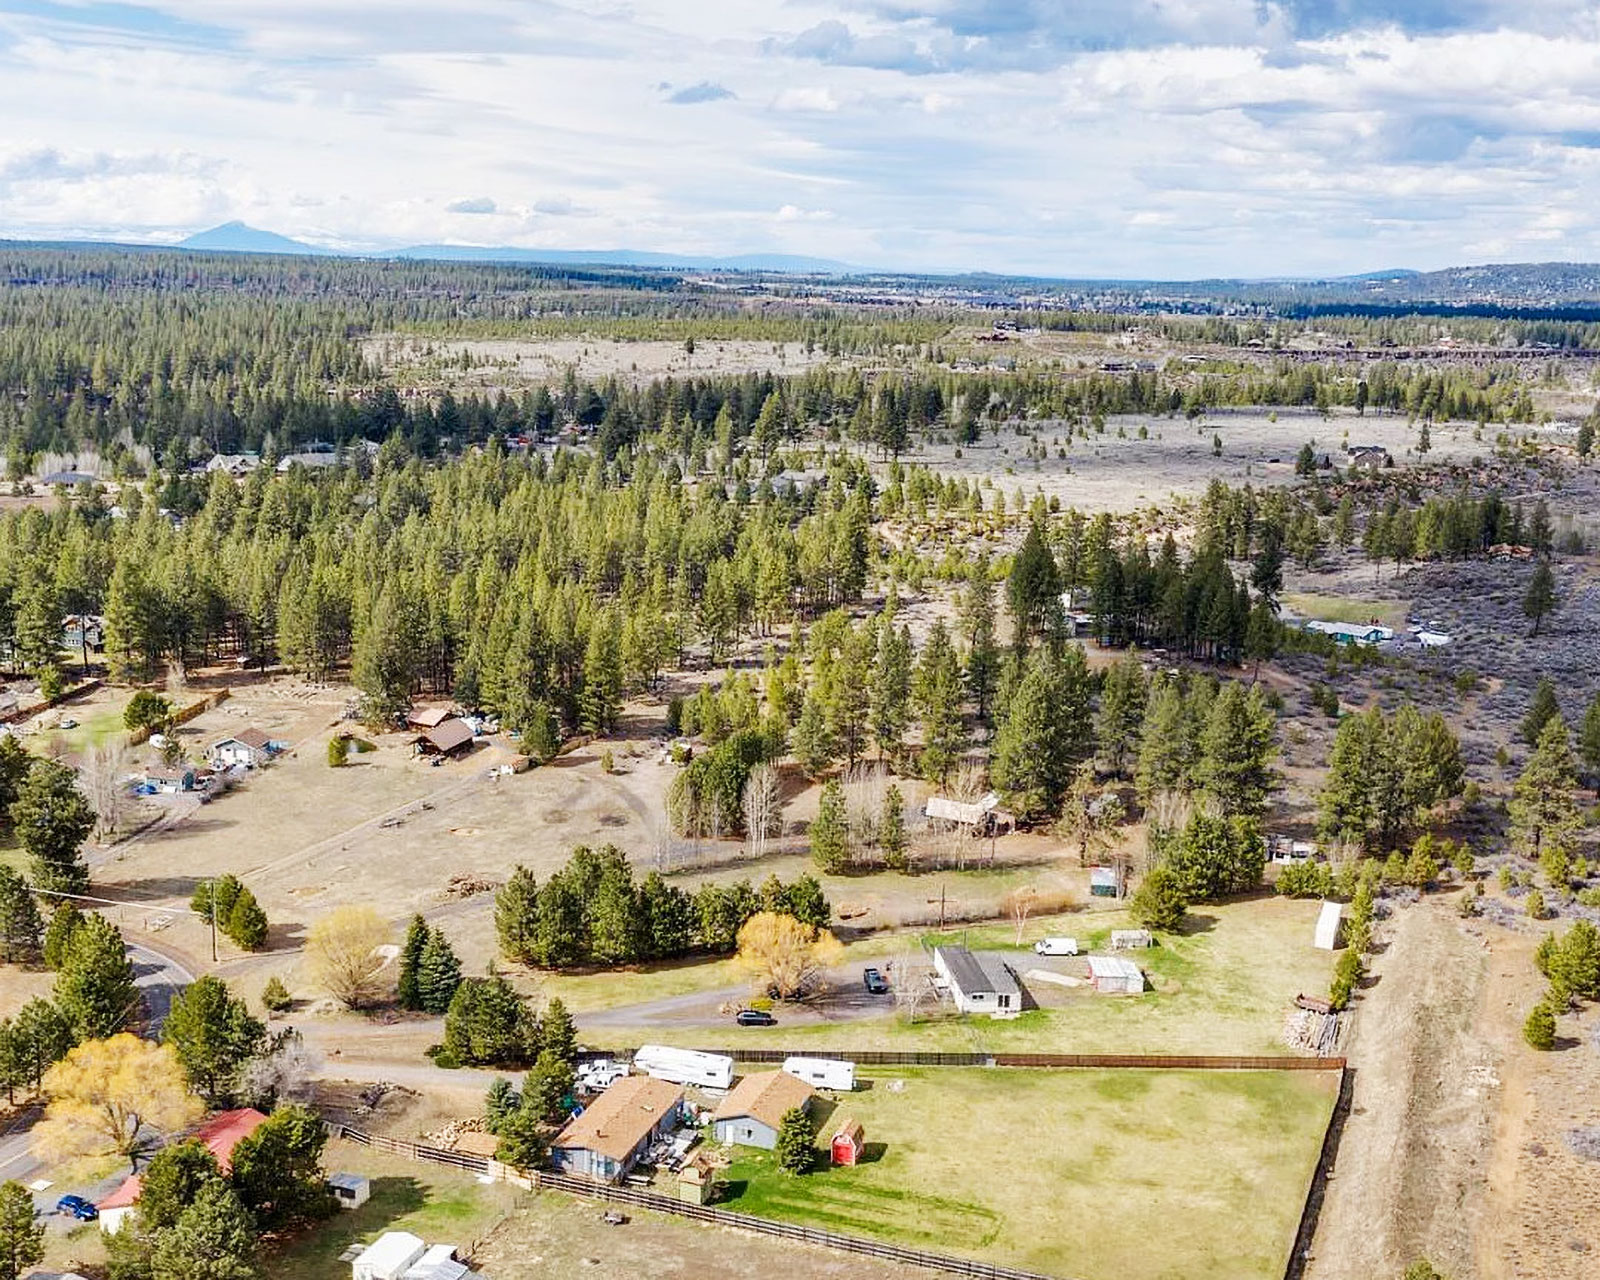 Aerial view of a rural neighborhood with conifers and pastures